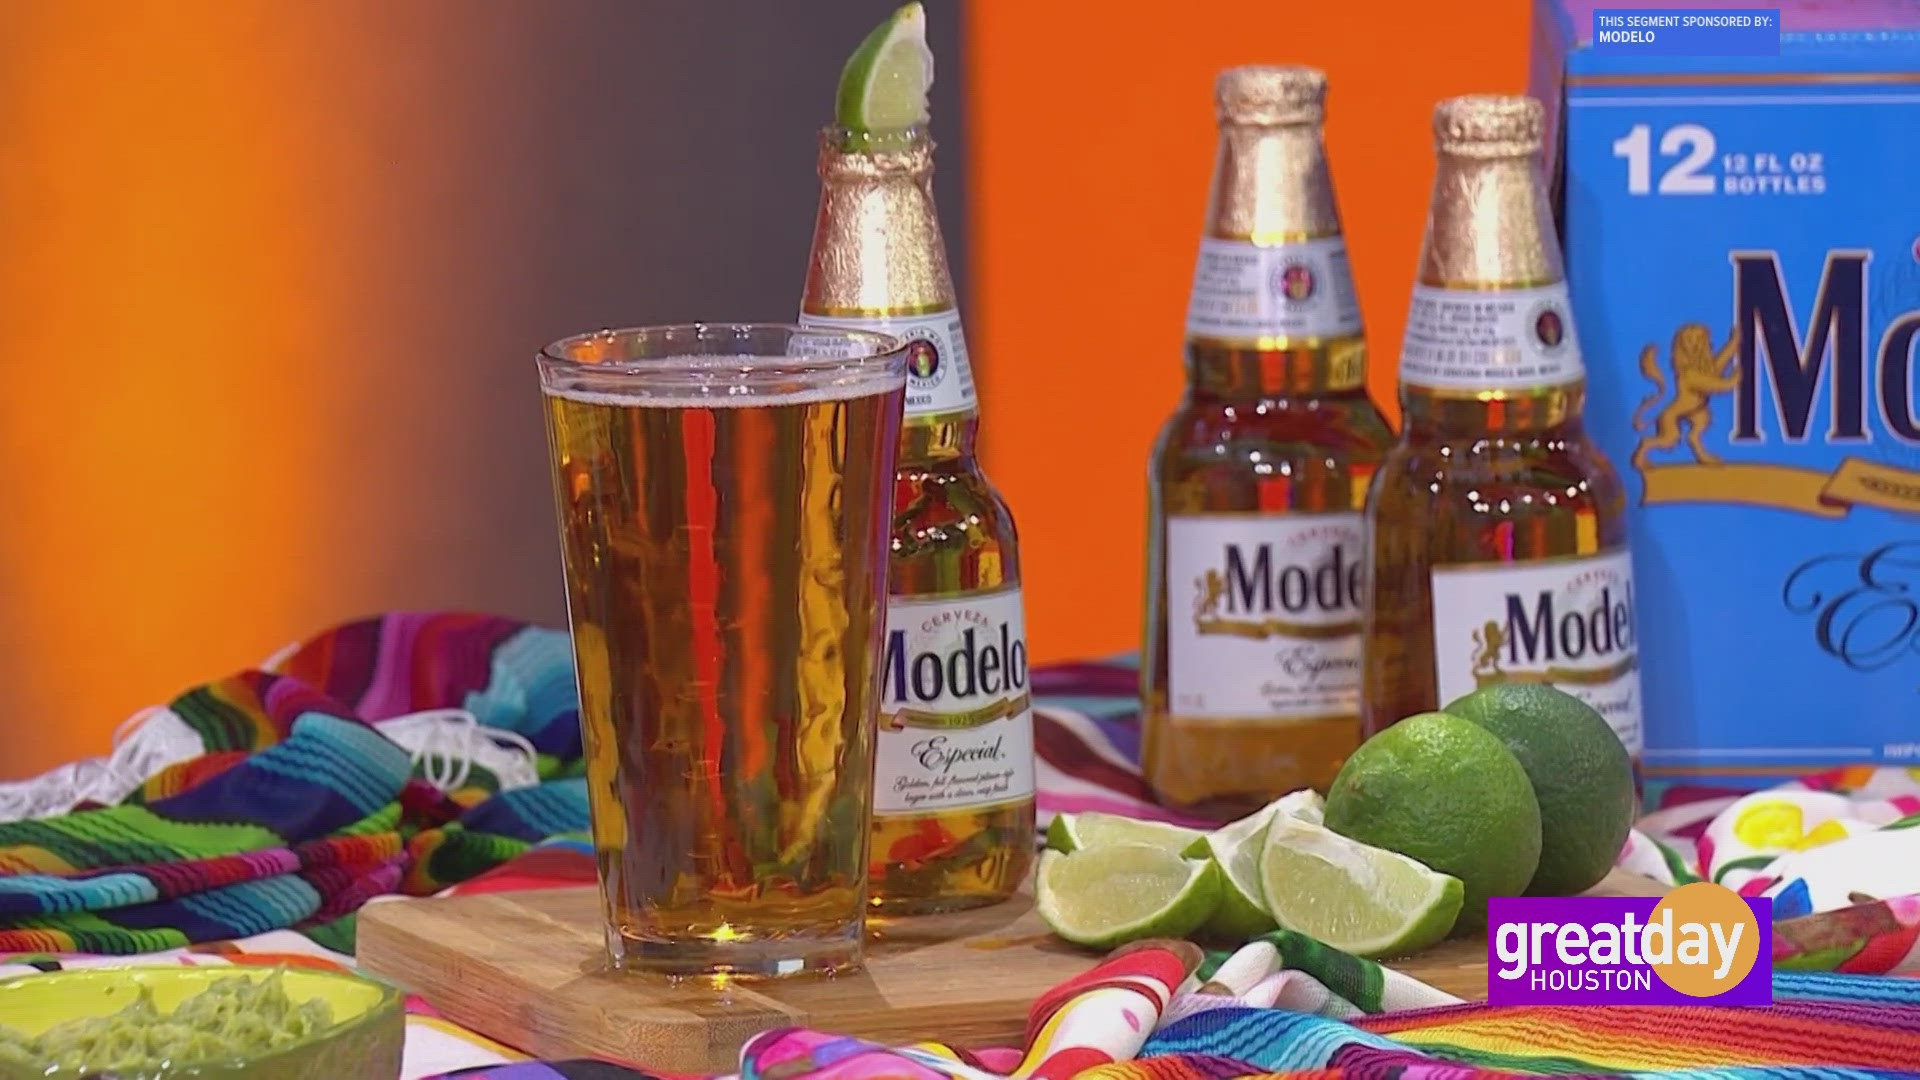 Lifestyle contributor Autumn Reo explains the origin of Cinco De Mayo and gives fun tips on celebrating the holiday with friends and family.